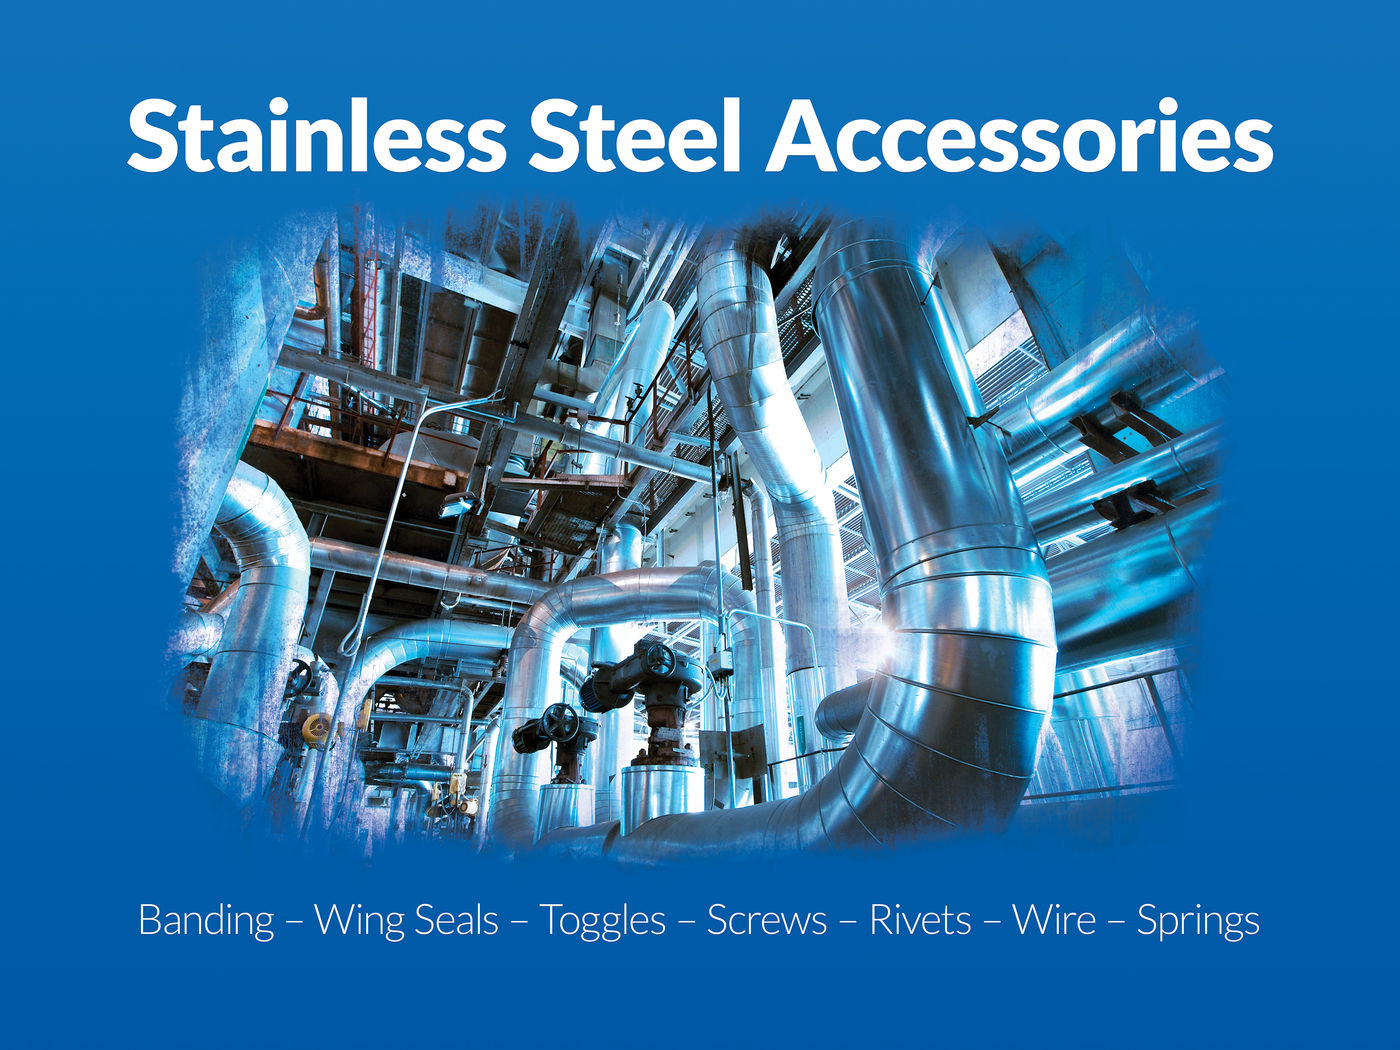 BS Stainless (2012) Accessories poster – Gastech 2012